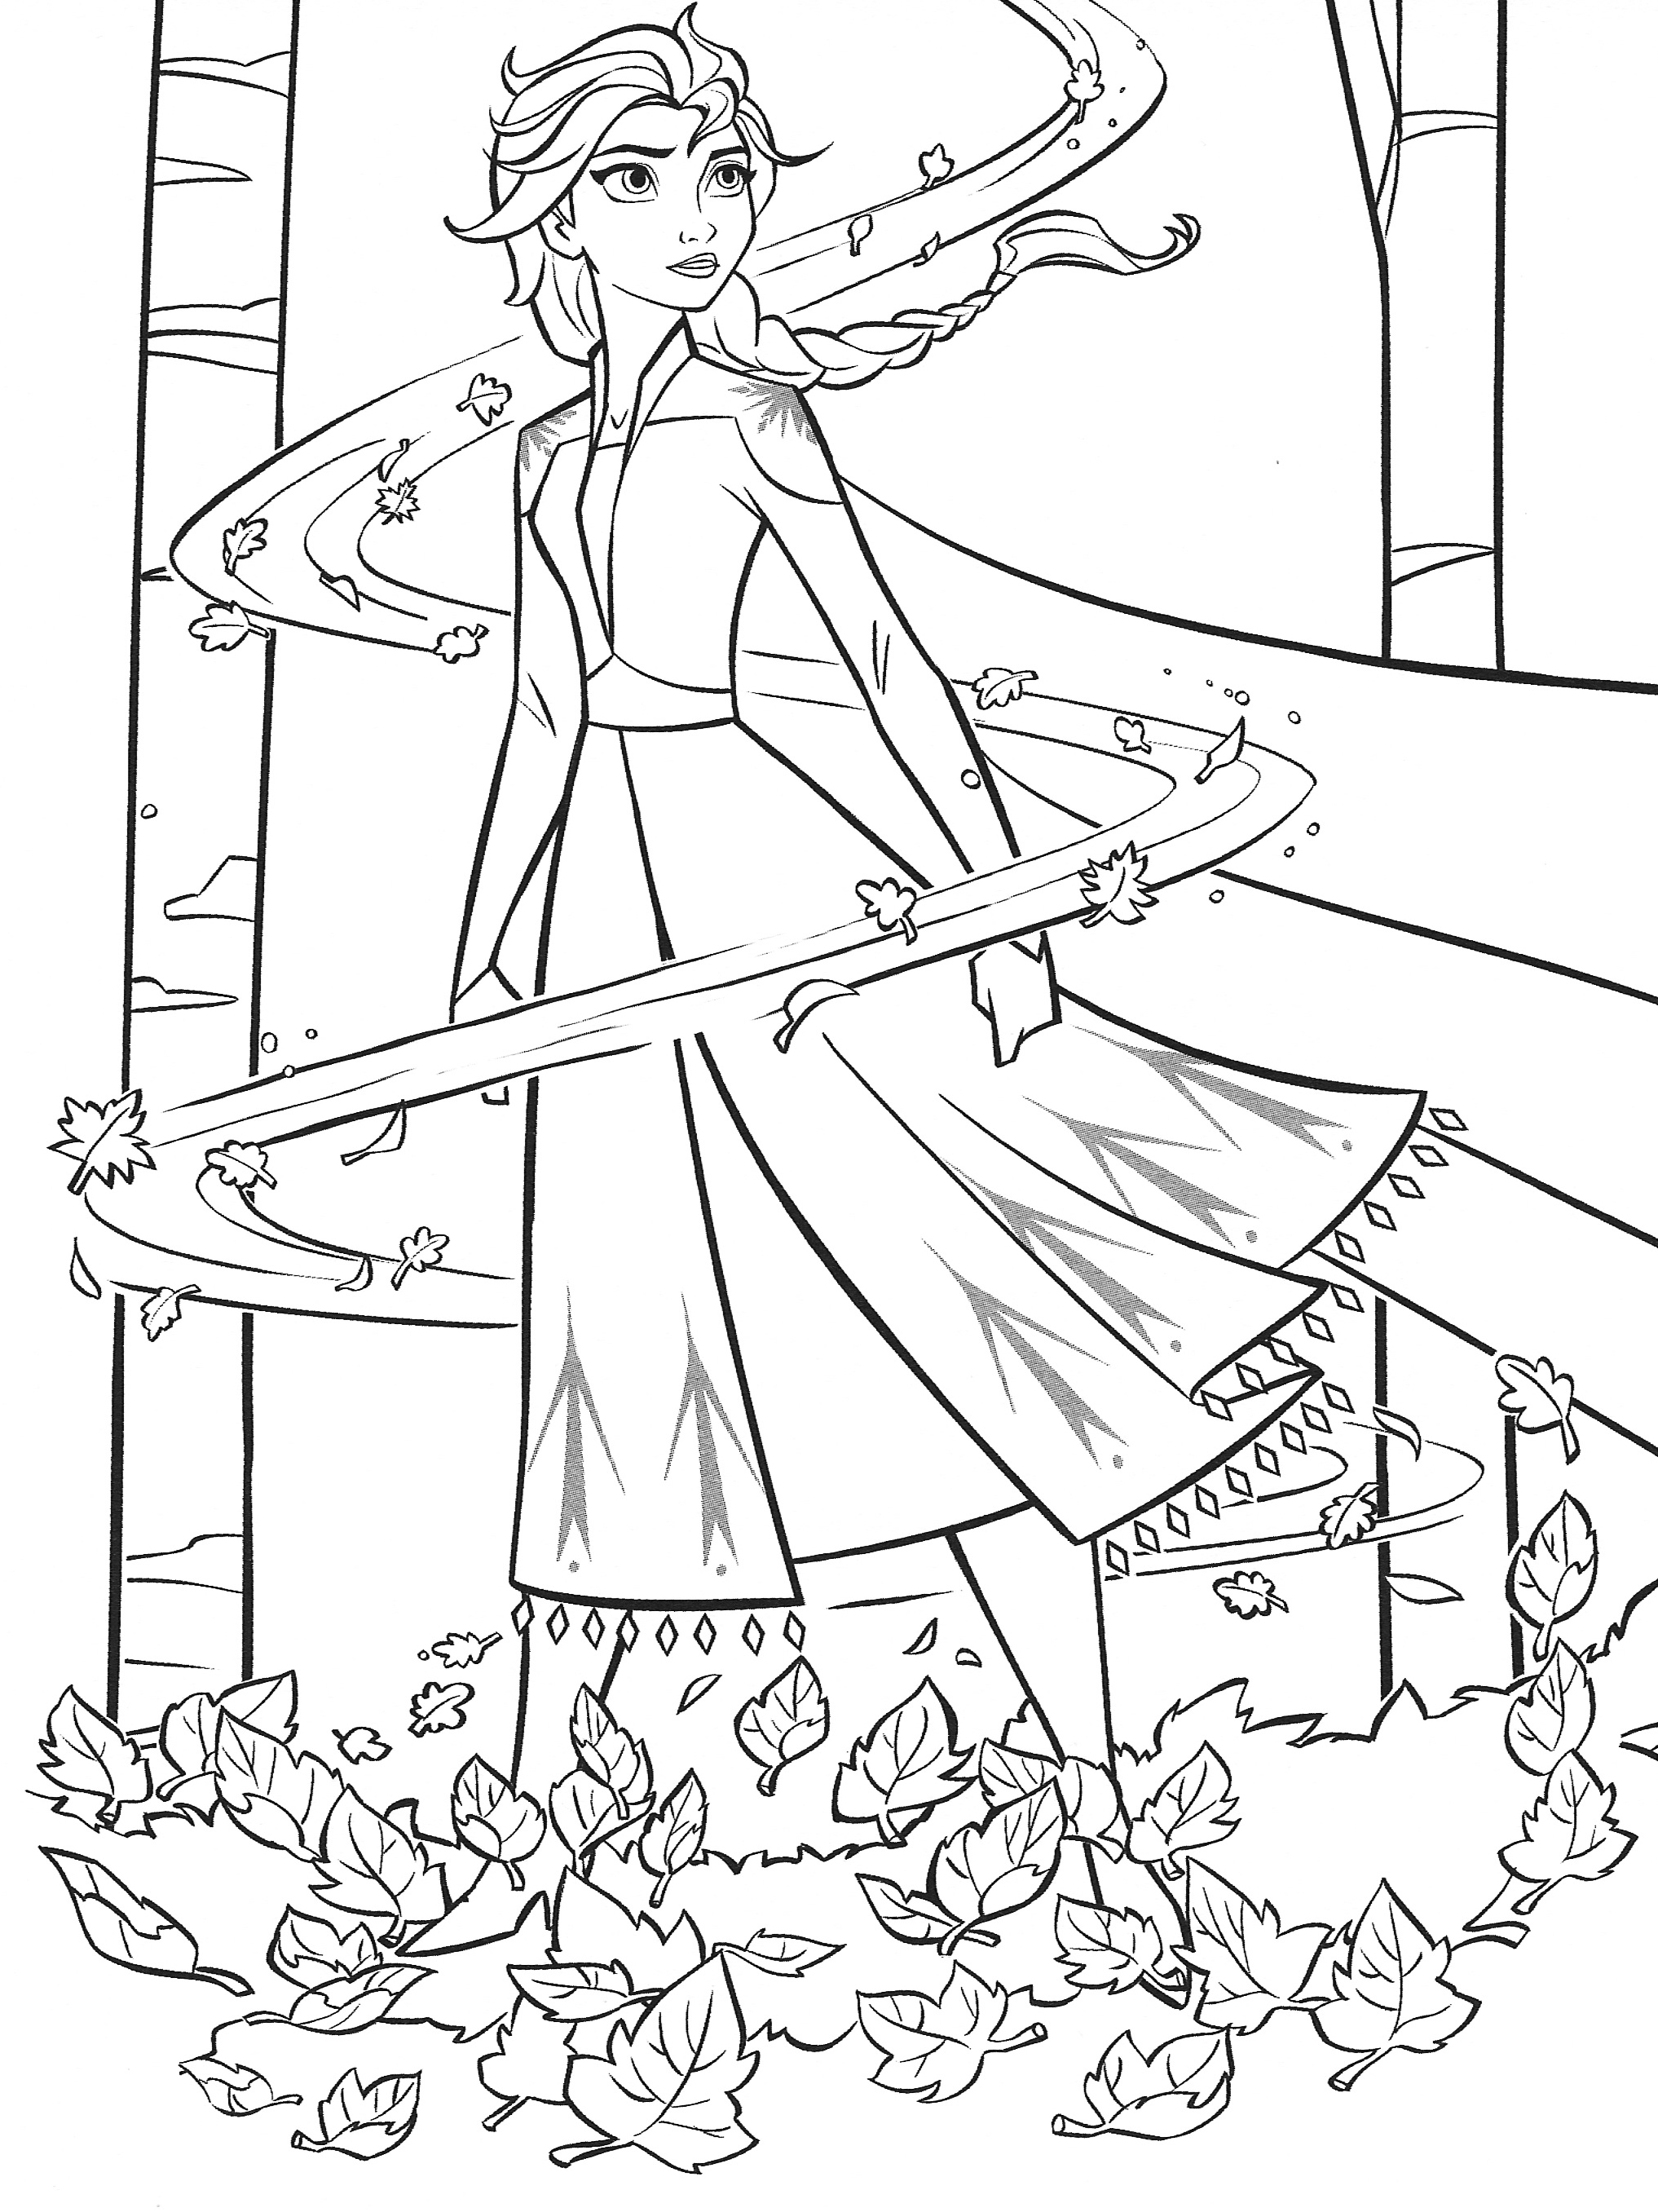 Elsa From Frozen 2 Coloring Page In 2020 Disney Princess Coloring Page